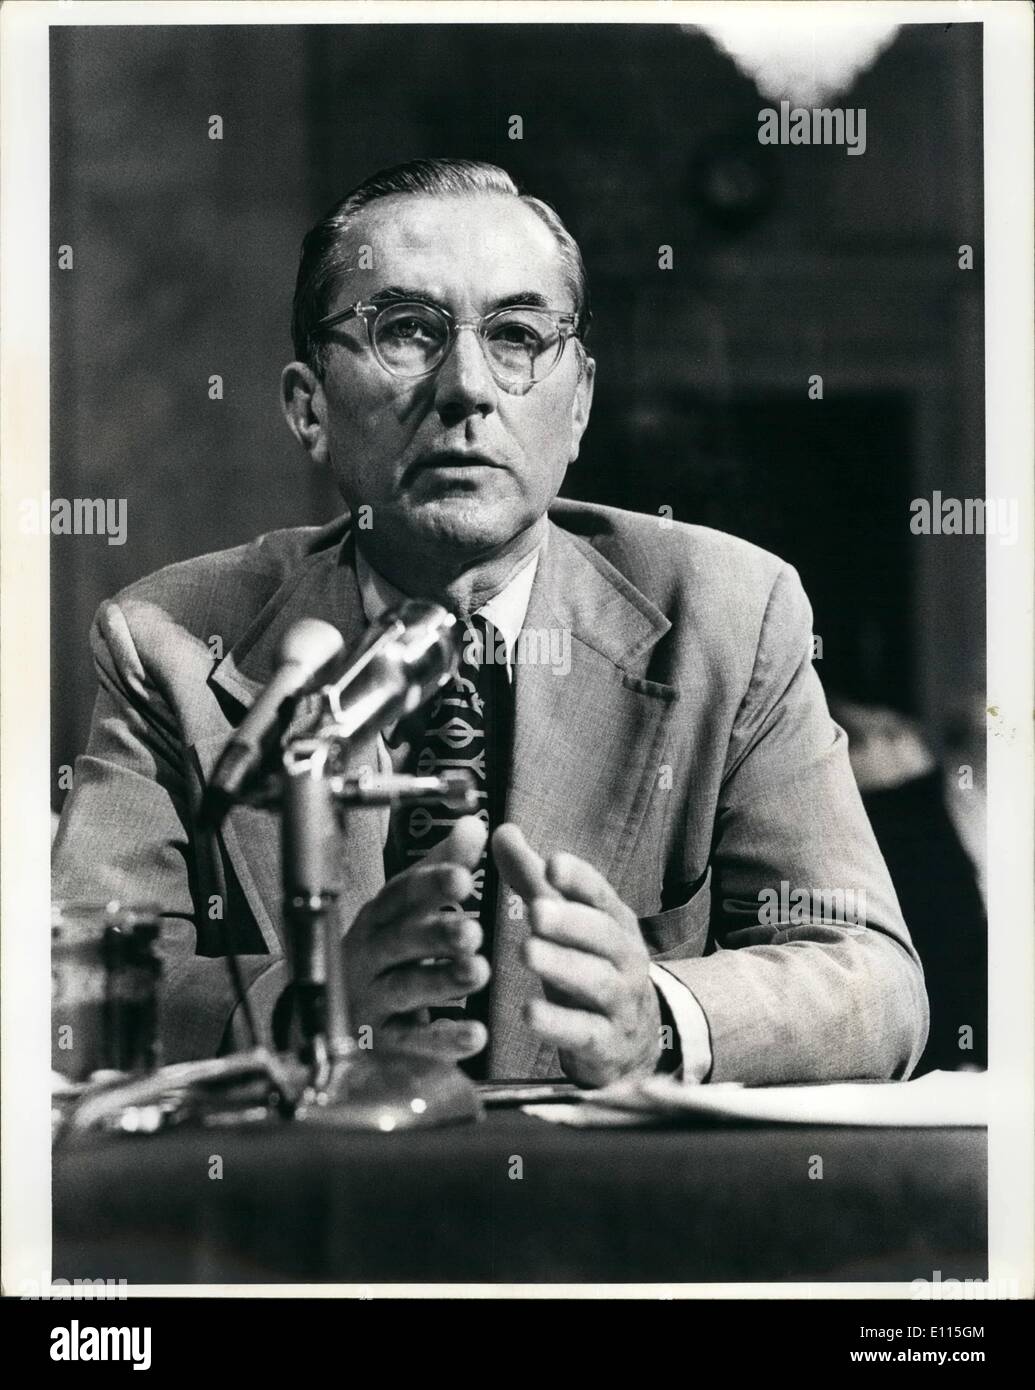 Sep. 09, 1975 - Washington, D.C.: William E. Colby, Director of CIA, testifying before the senate select committee on Intelligence. Stock Photo